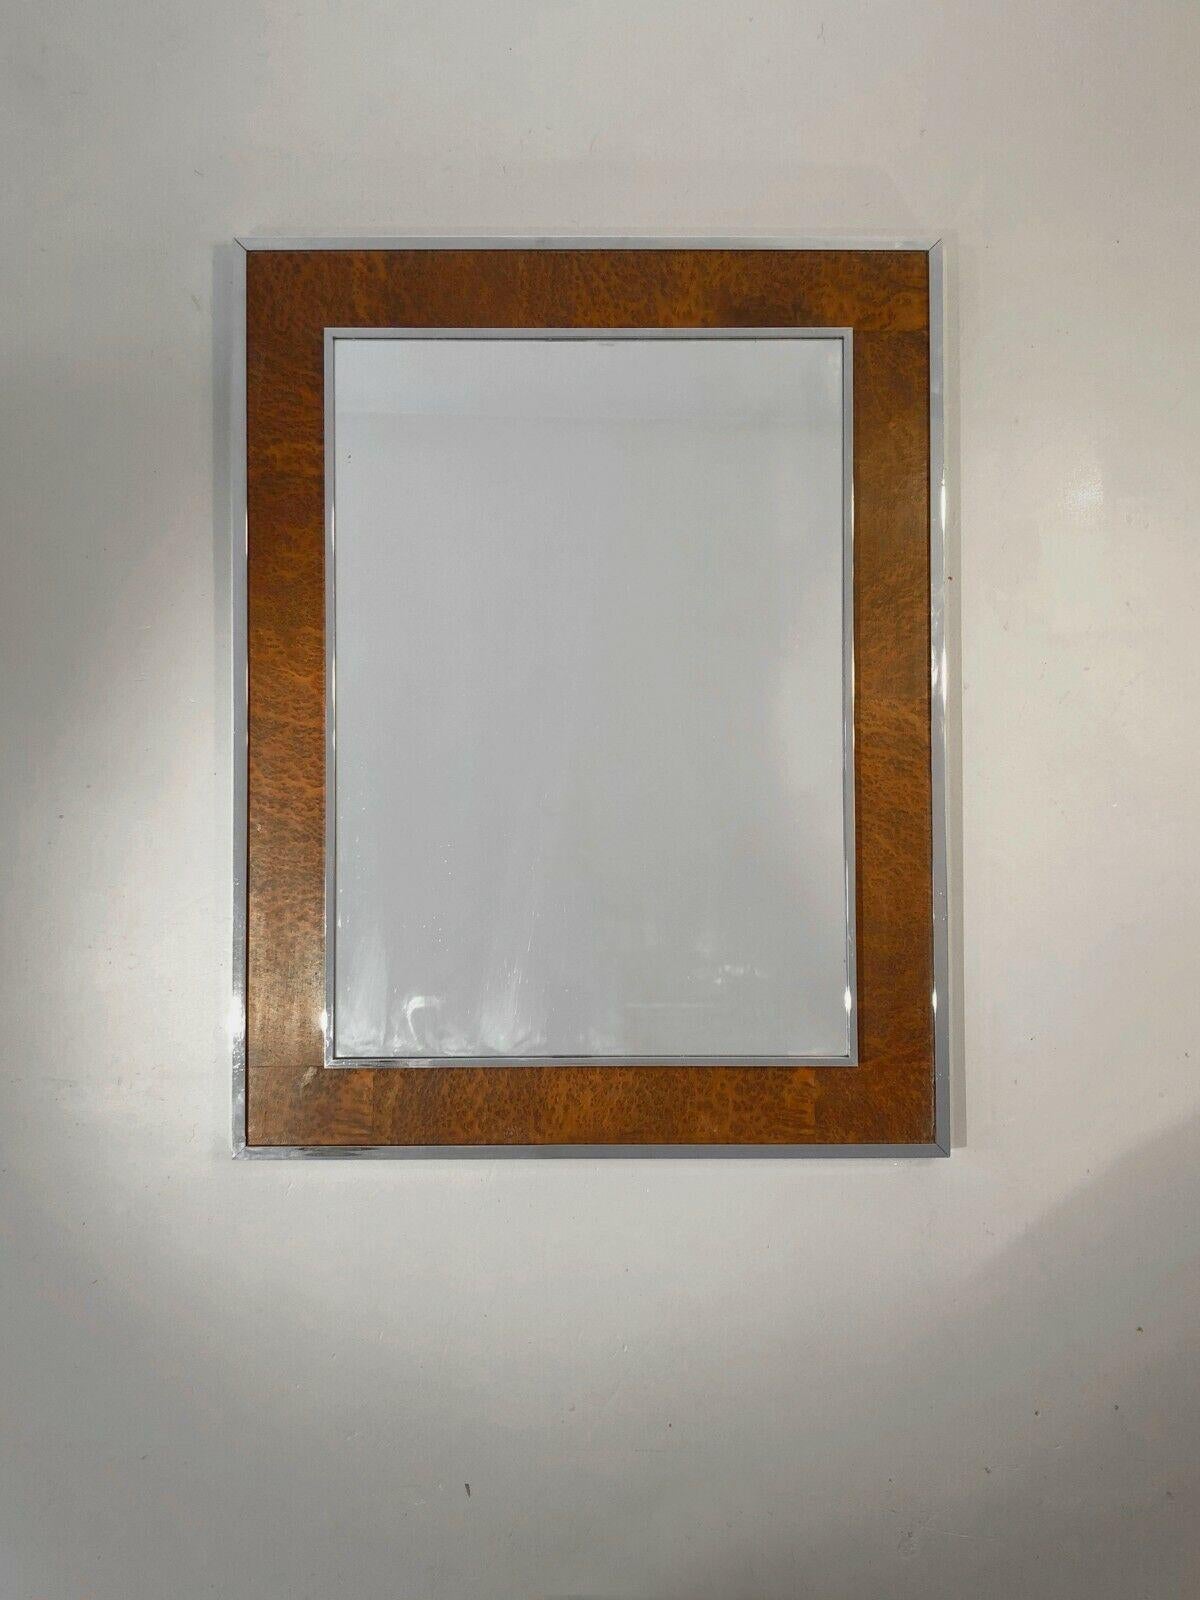 A luxurious rectangular wall mirror, Post-Modernist, Memphis, Shabby-Chic, with a frame decorated with a glowing leather-style elm burl veneer between 2 raised borders in chrome-plated metal of square section, with beautiful, very sharp finishes,